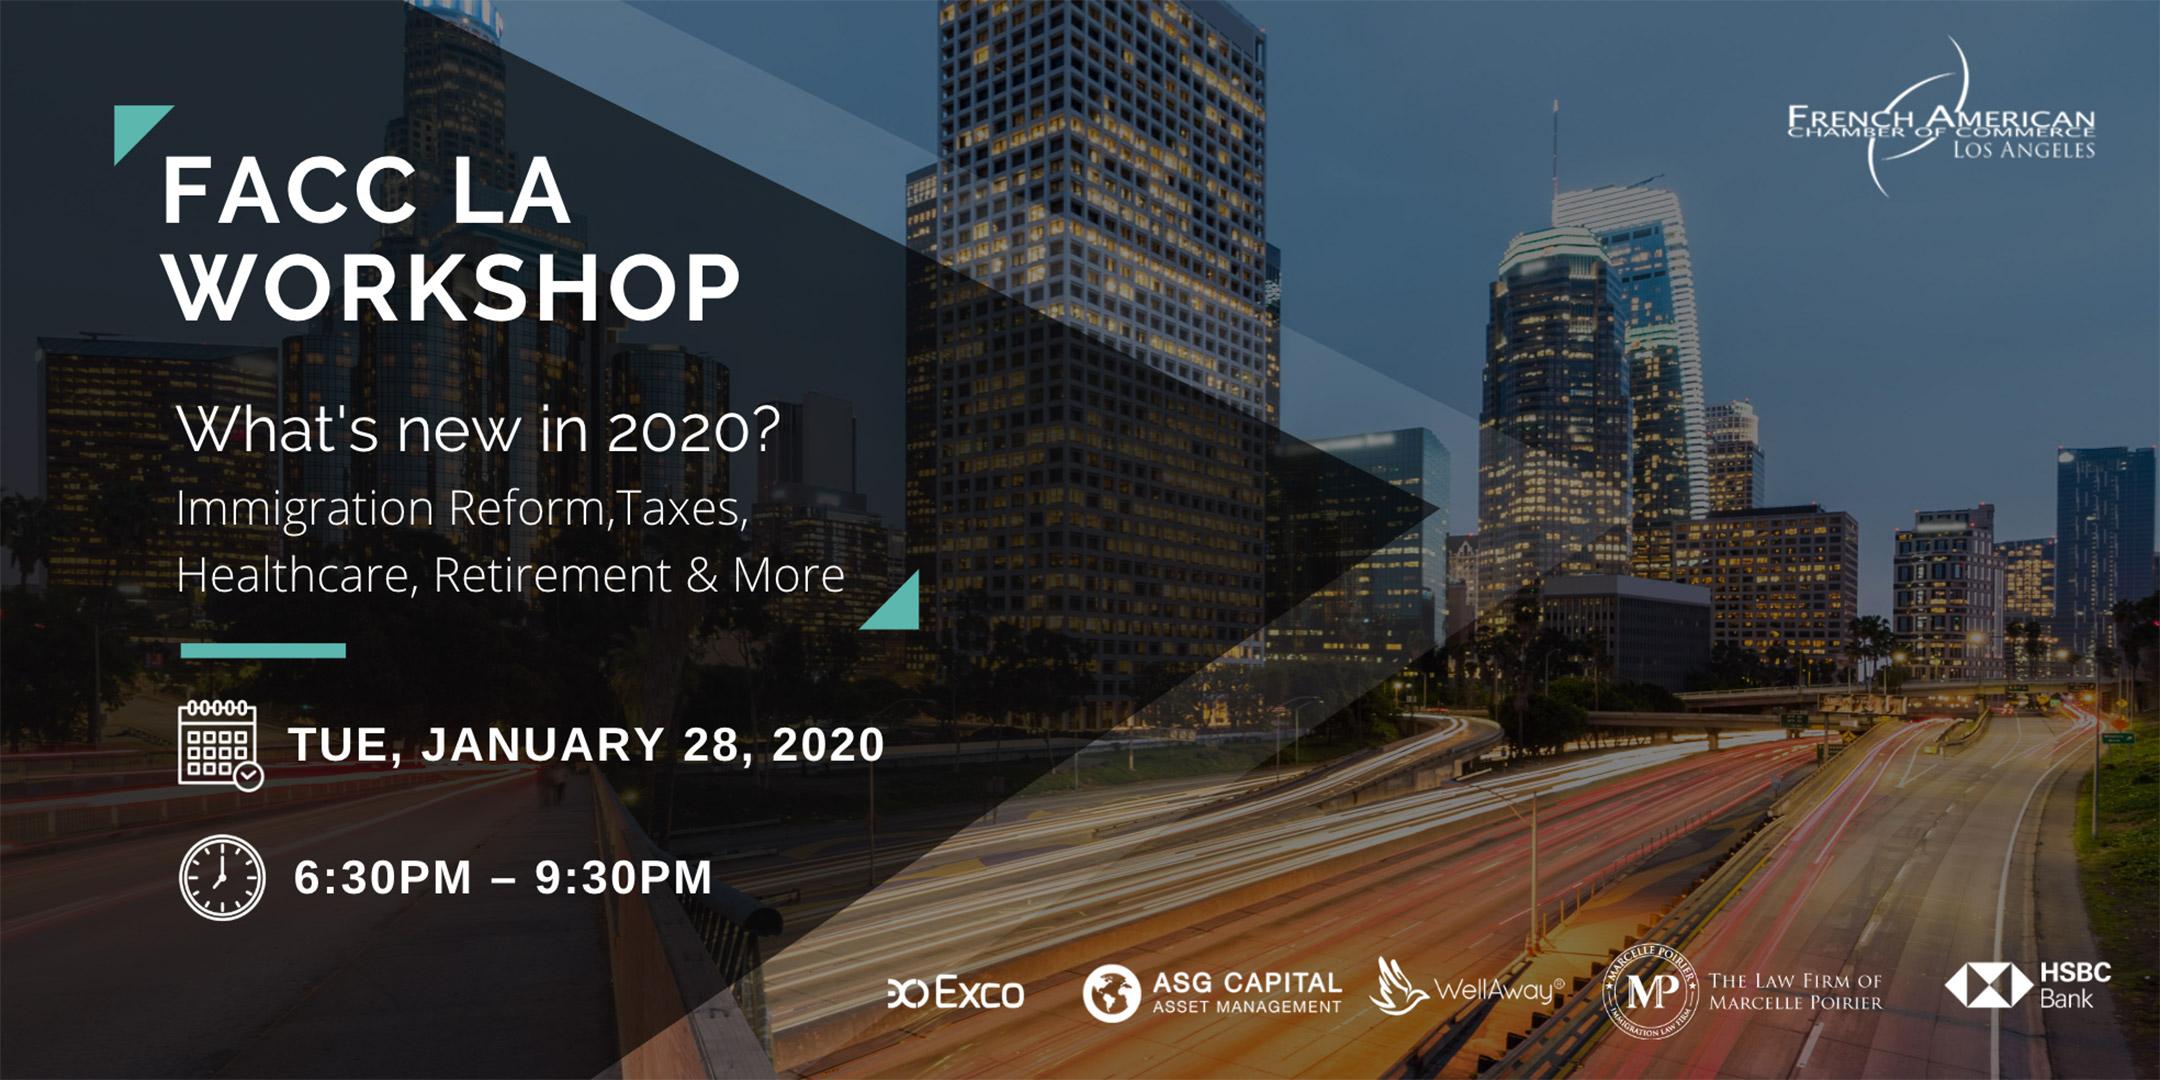 FACC LA WORKSHOP - What's new in 2020? Immigration Reform, Taxes, Healthcare, Retirement & More